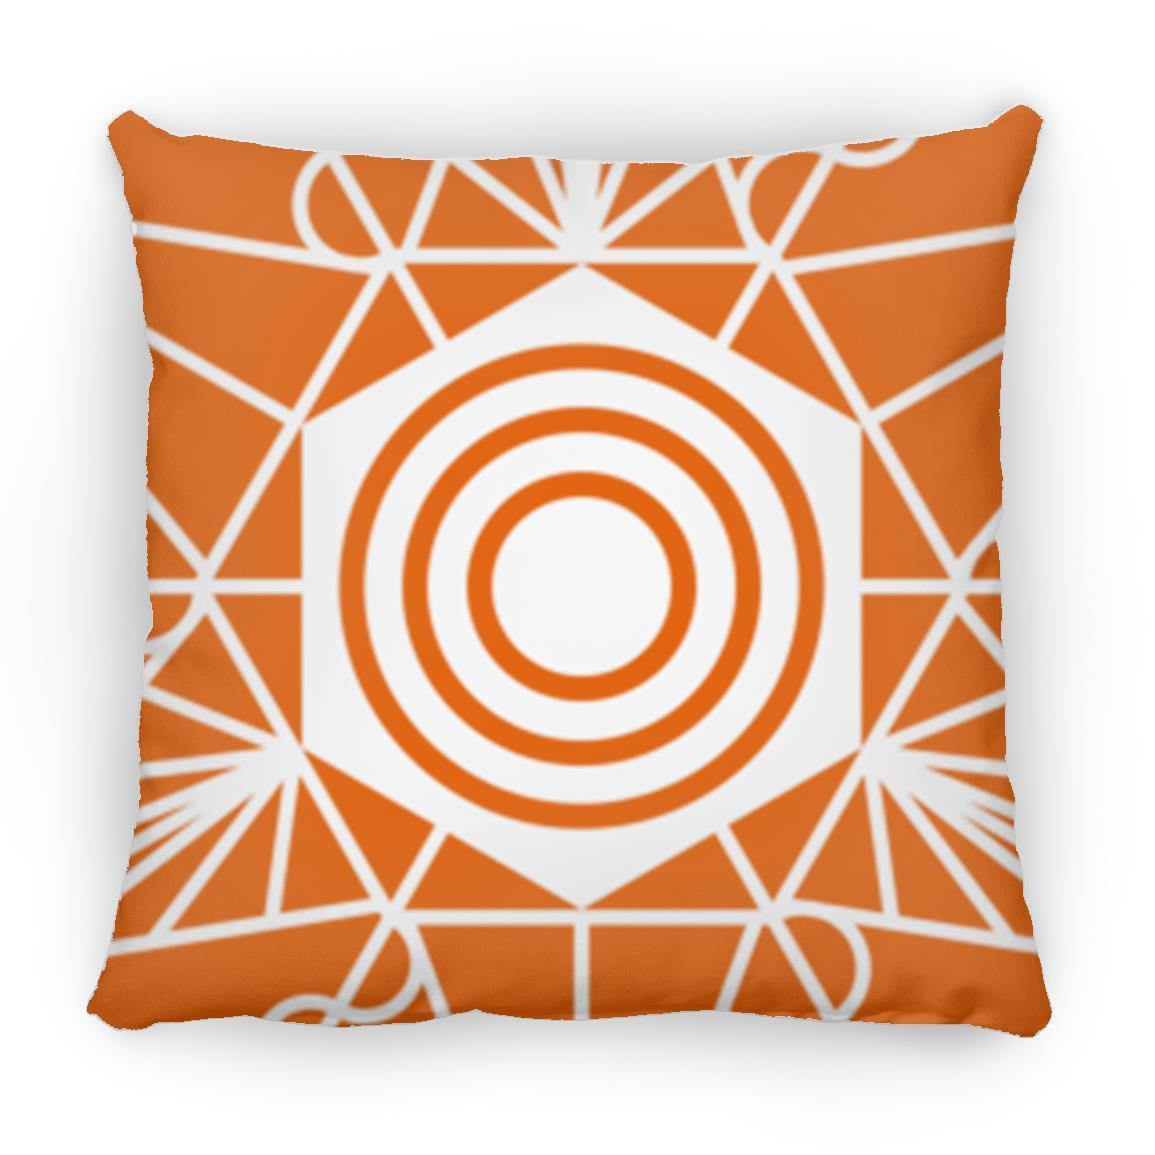 Crop Circle Pillow - Gussage St Andrews - Shapes of Wisdom